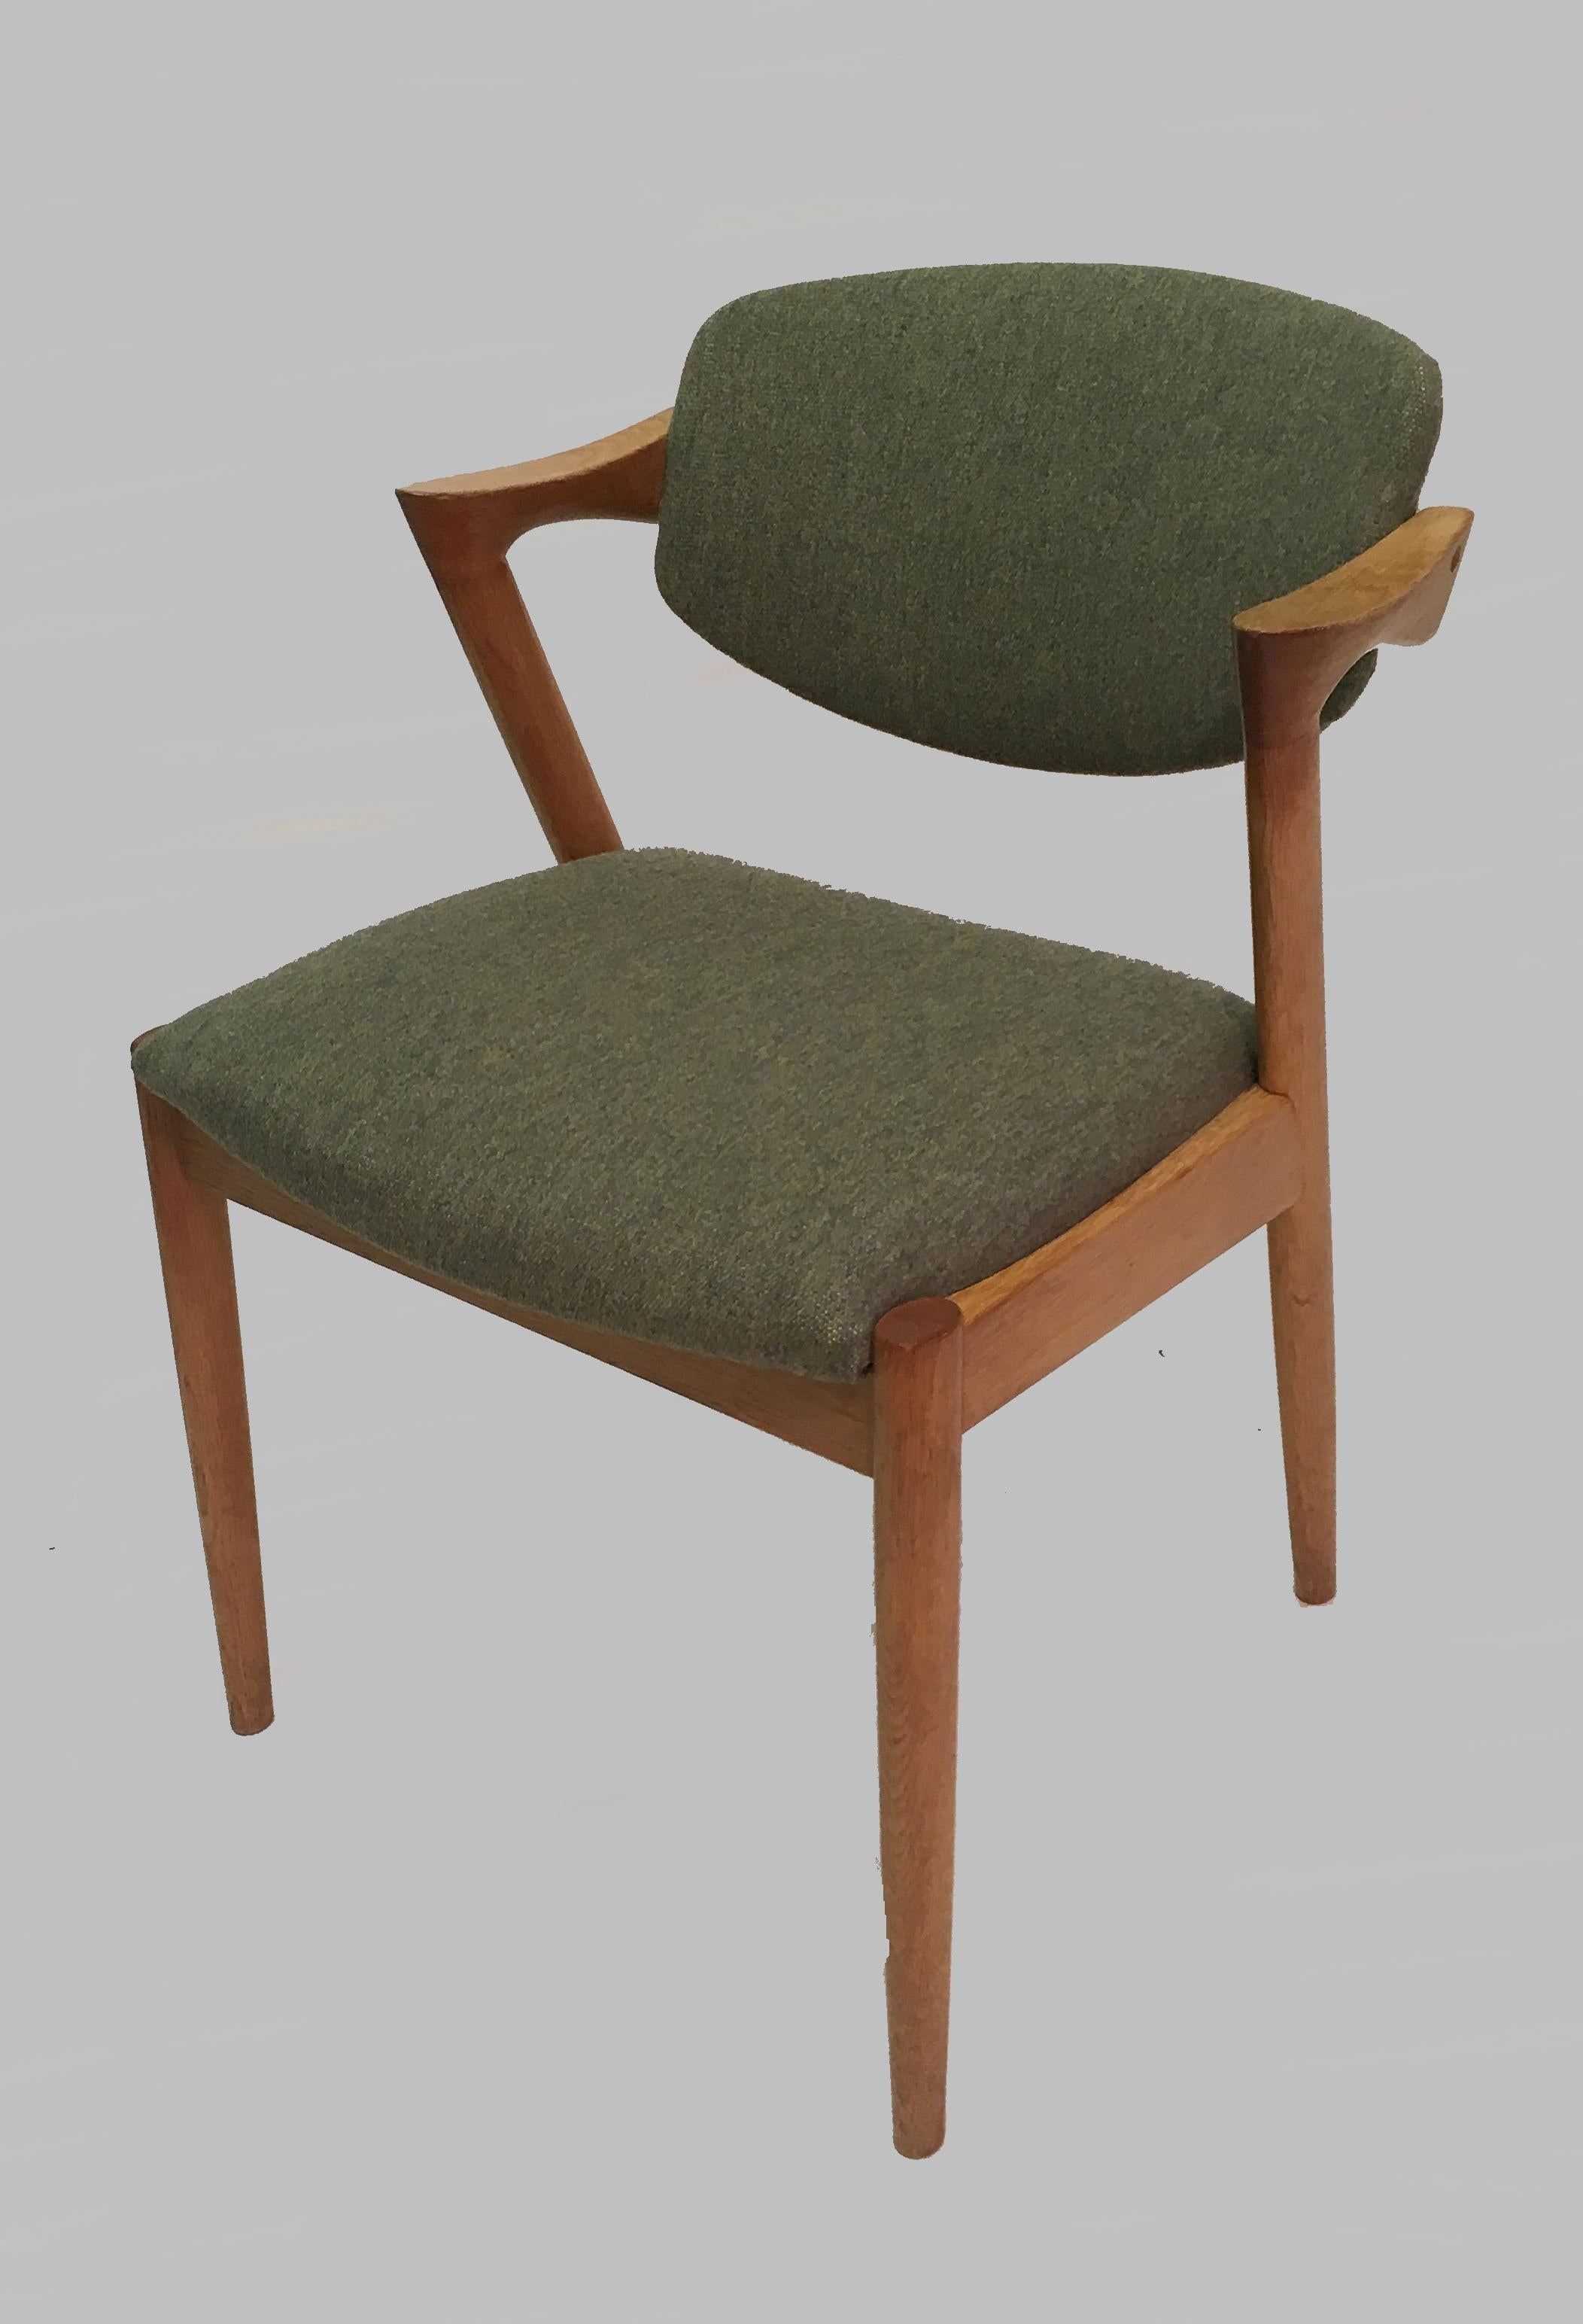 Set of ten fully restored and refinished model 42 dining chairs in oak with adjustable backrest by Kai Kristiansen for Schous Møbelfabrik.

The chairs have Kai Kristiansens typical light and elegant design that make them fit in easily where you want